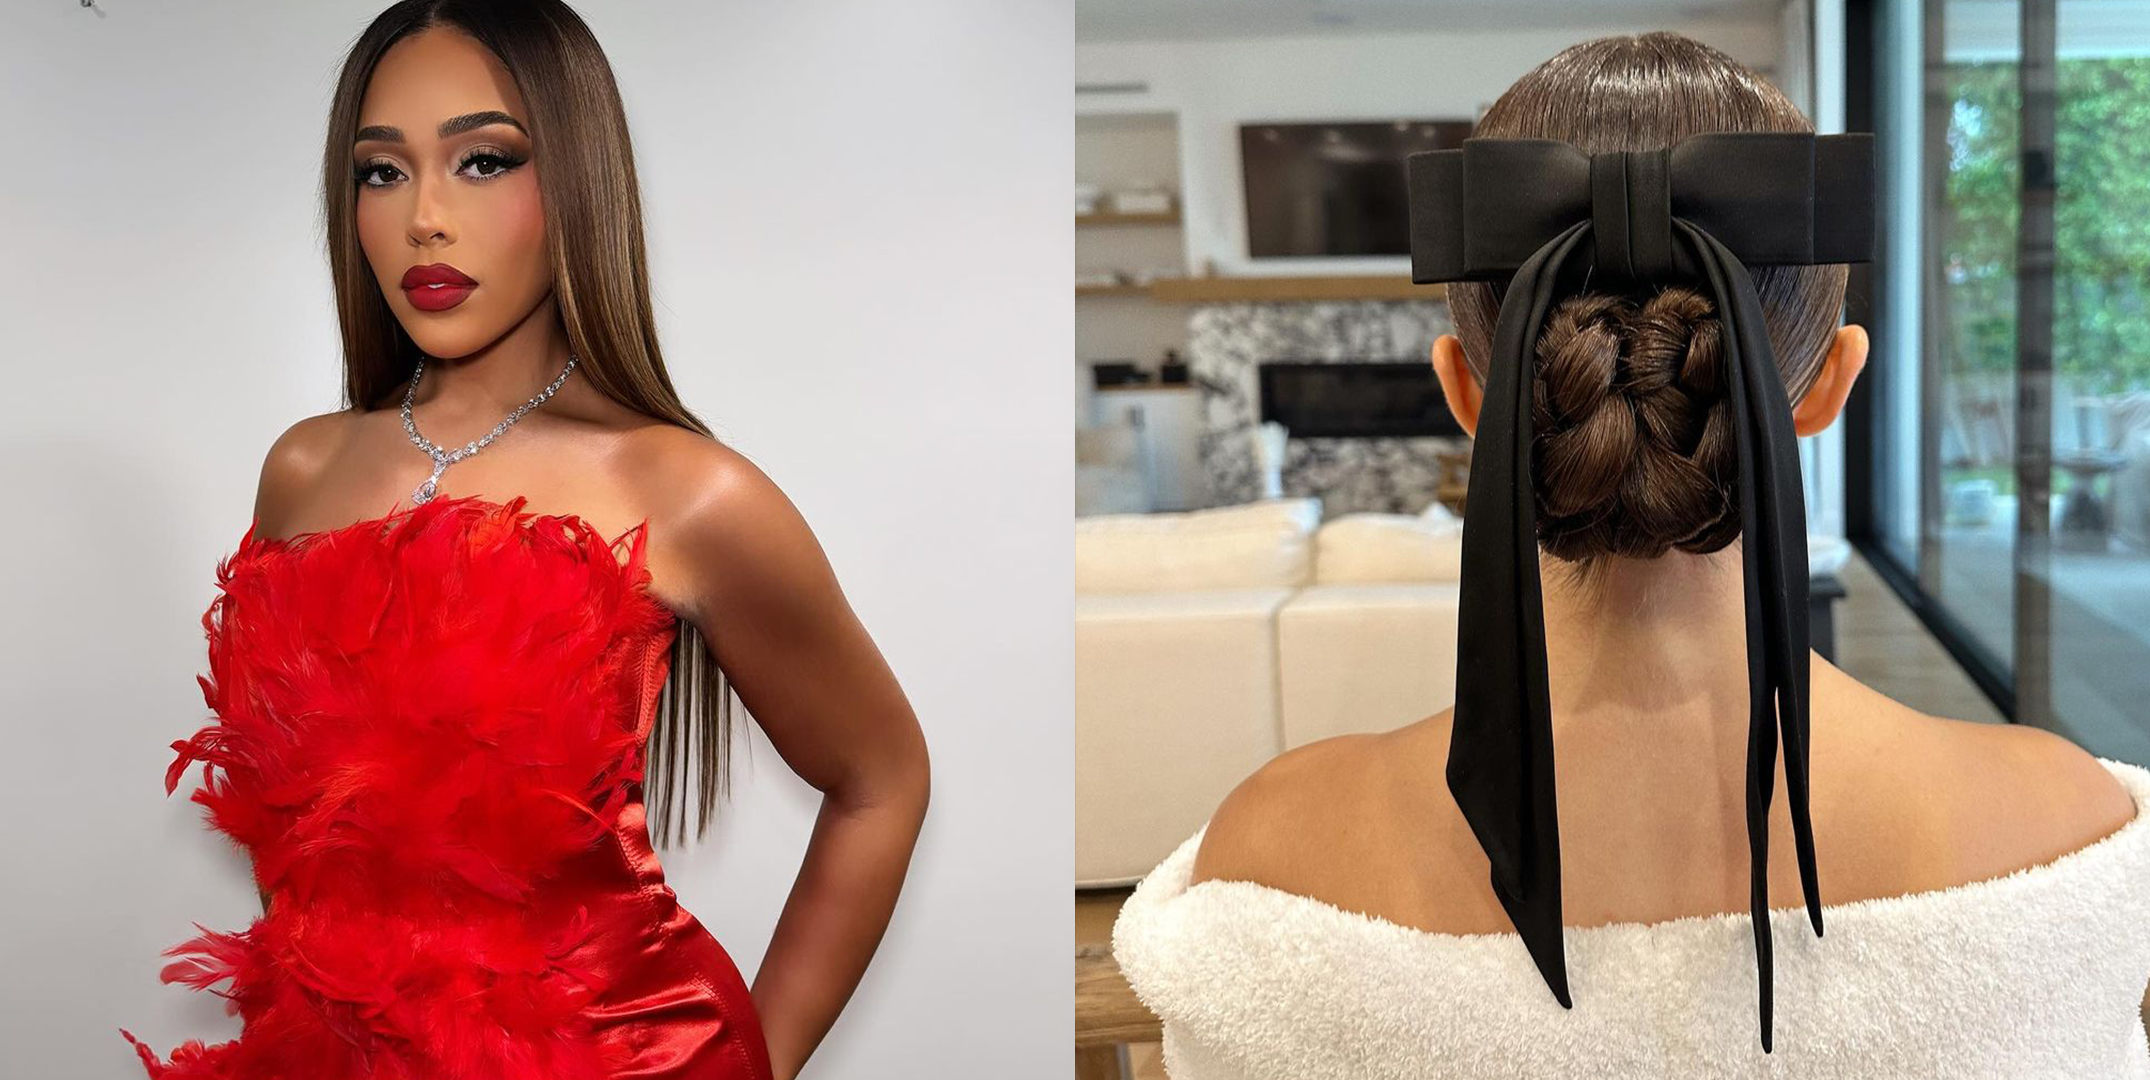 25 Stunning Prom Hairstyles for Every Hair Type